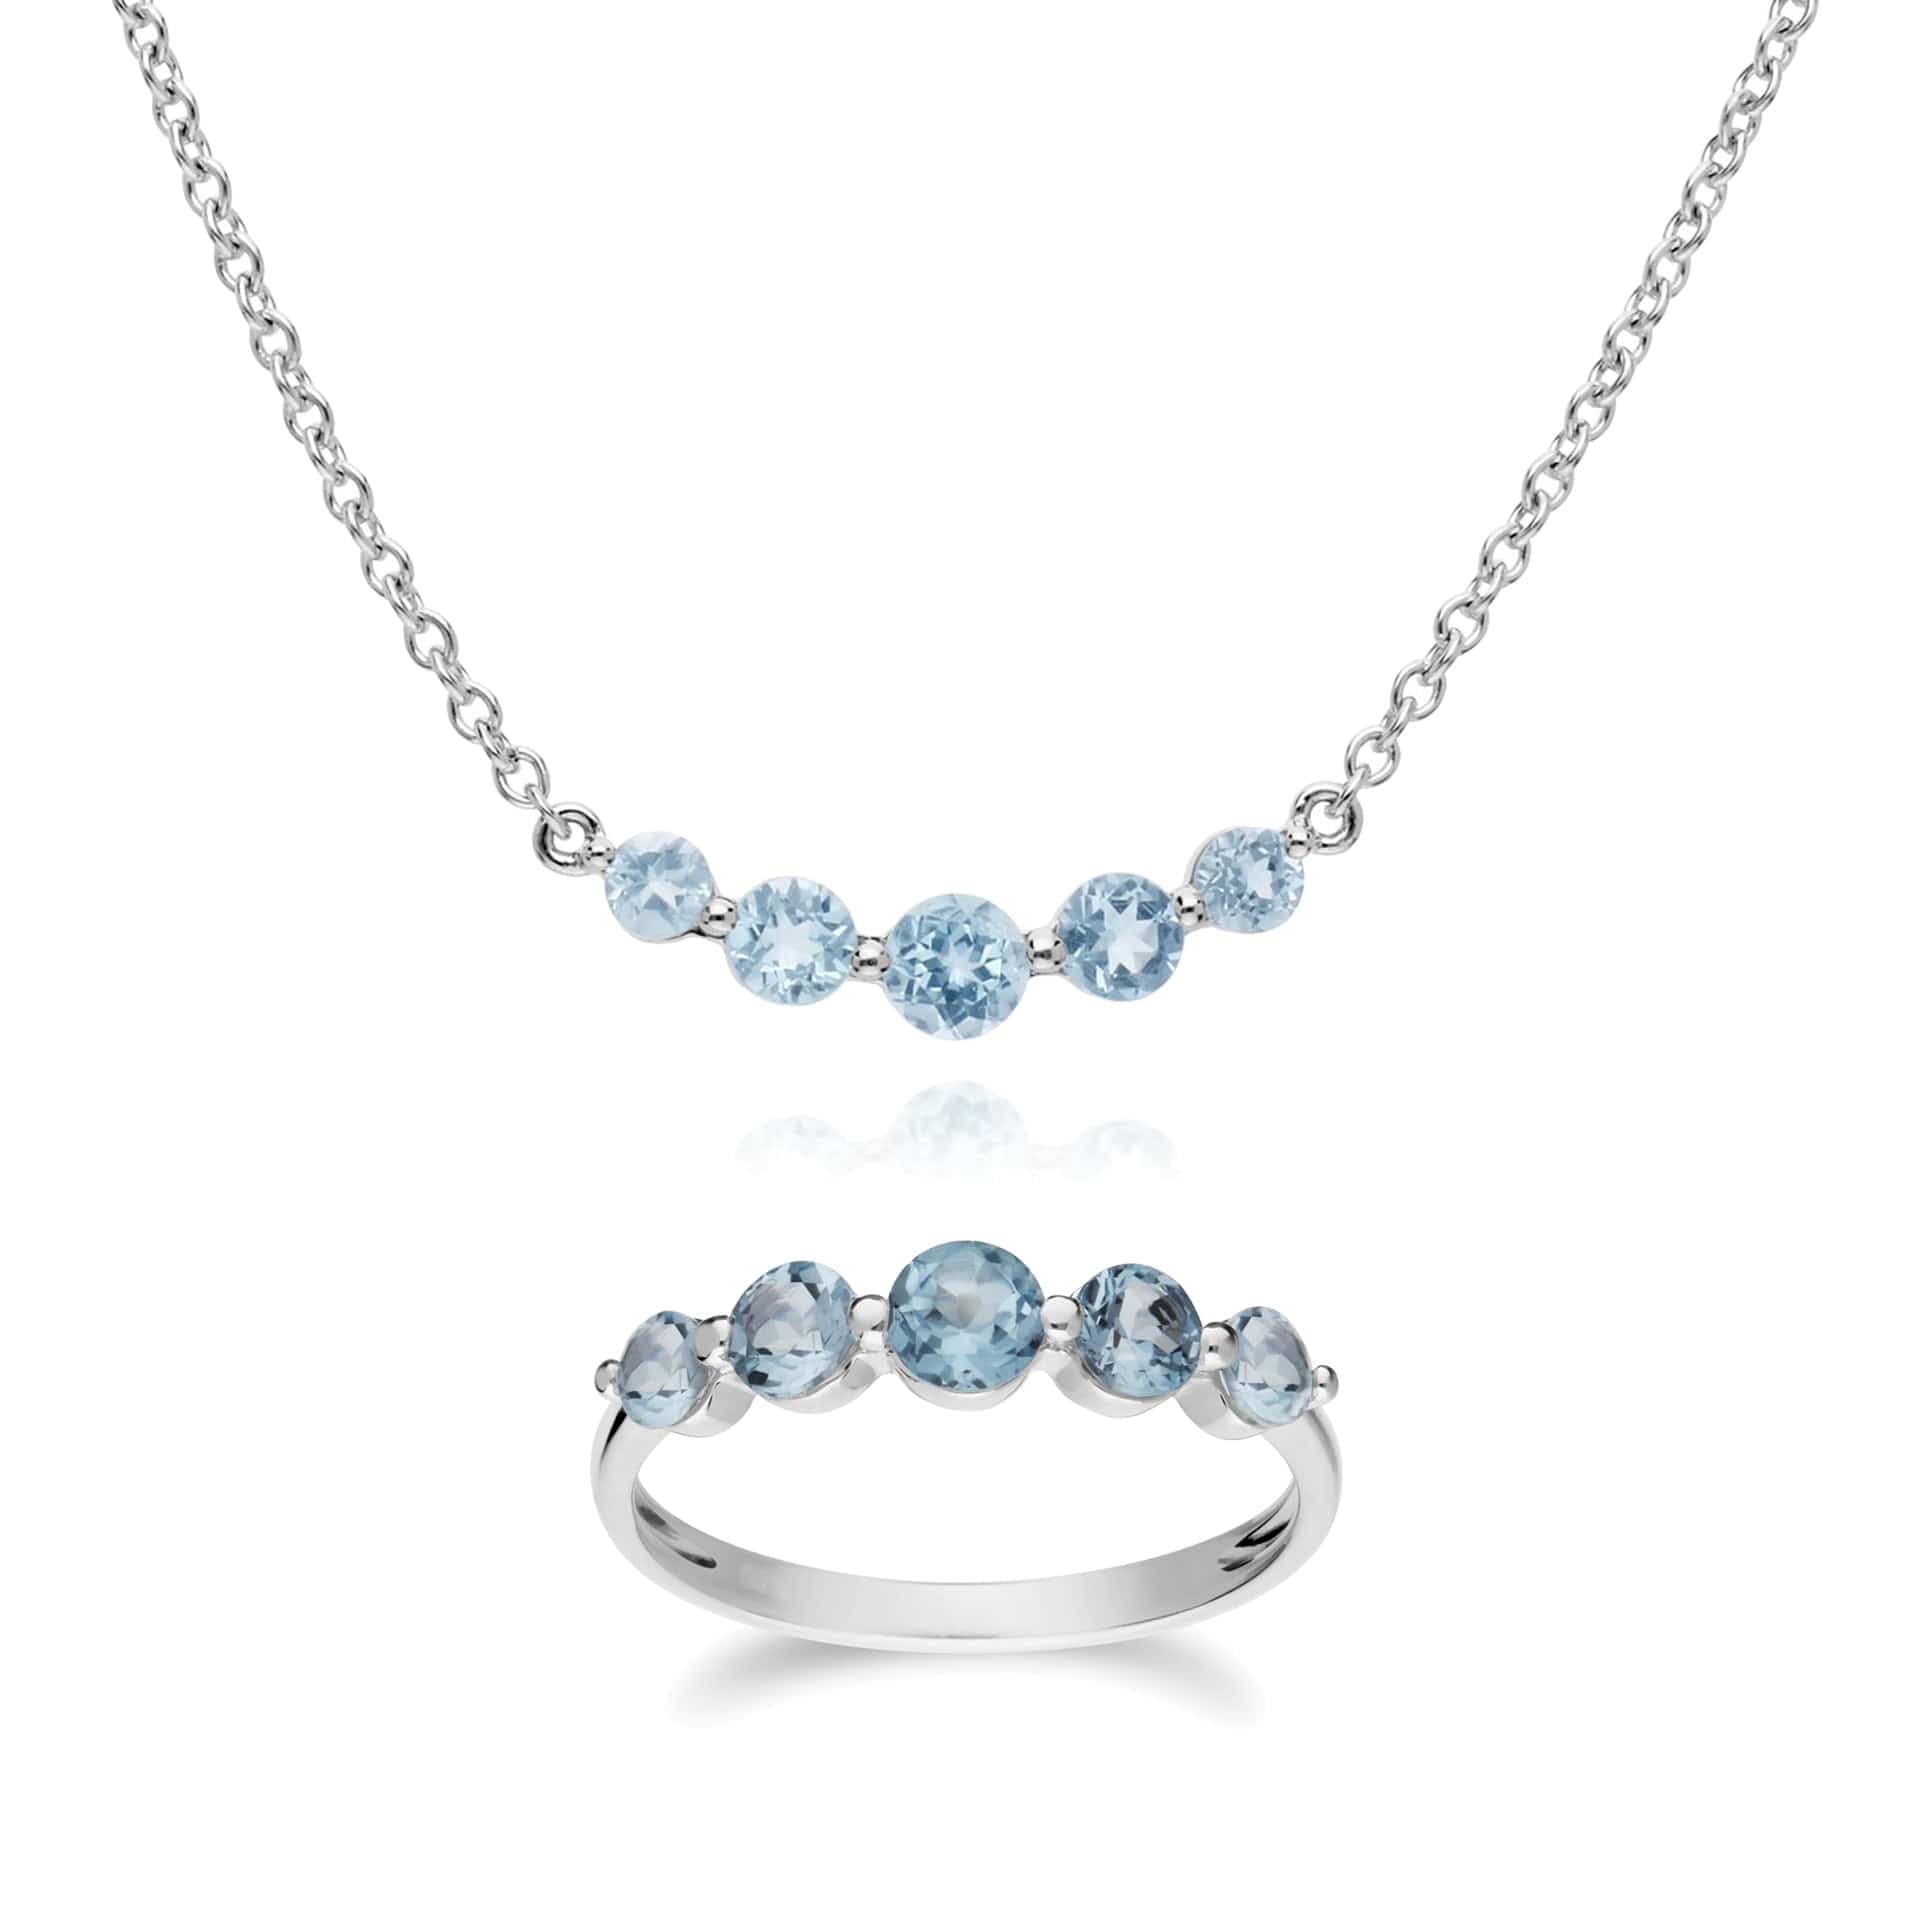 270N034101925-270R055901925 Classic Round Blue Topaz Five Stone Gradient Ring & Necklace Set in 925 Sterling Silver 1